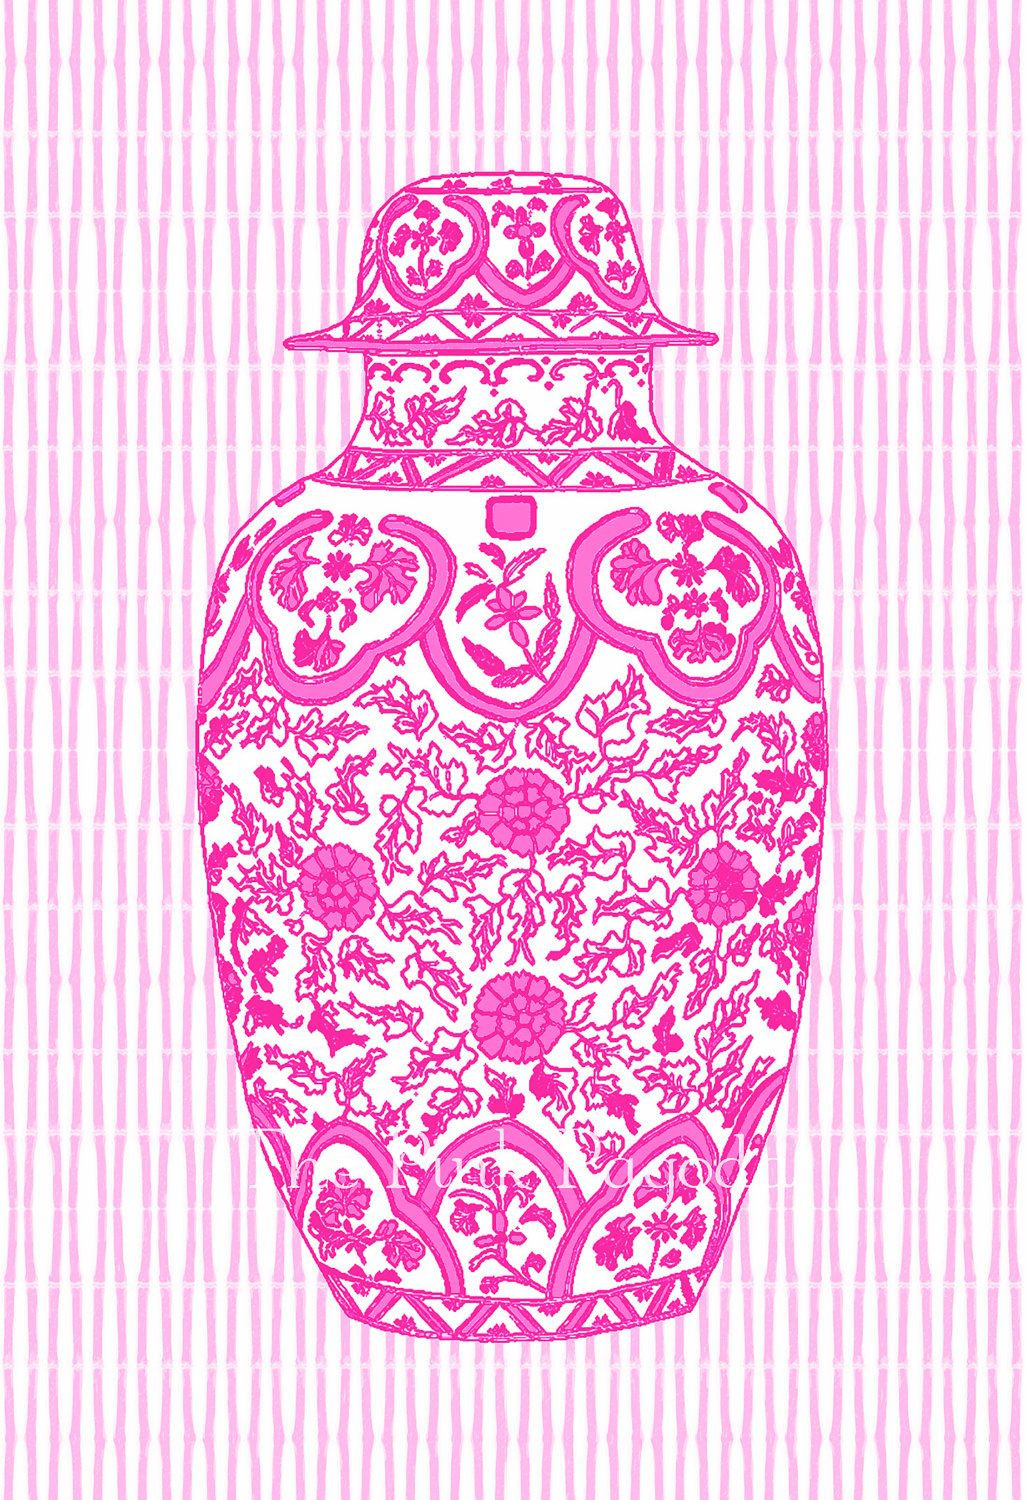 10 Stylish Hot Pink Flower Vases 2024 free download hot pink flower vases of hot pink ming chinoiserie ginger jar on bamboo stripe giclee pertaining to hot pink ming chinoiserie ginger jar on bamboo stripe 11x14 giclee the pink pagoda